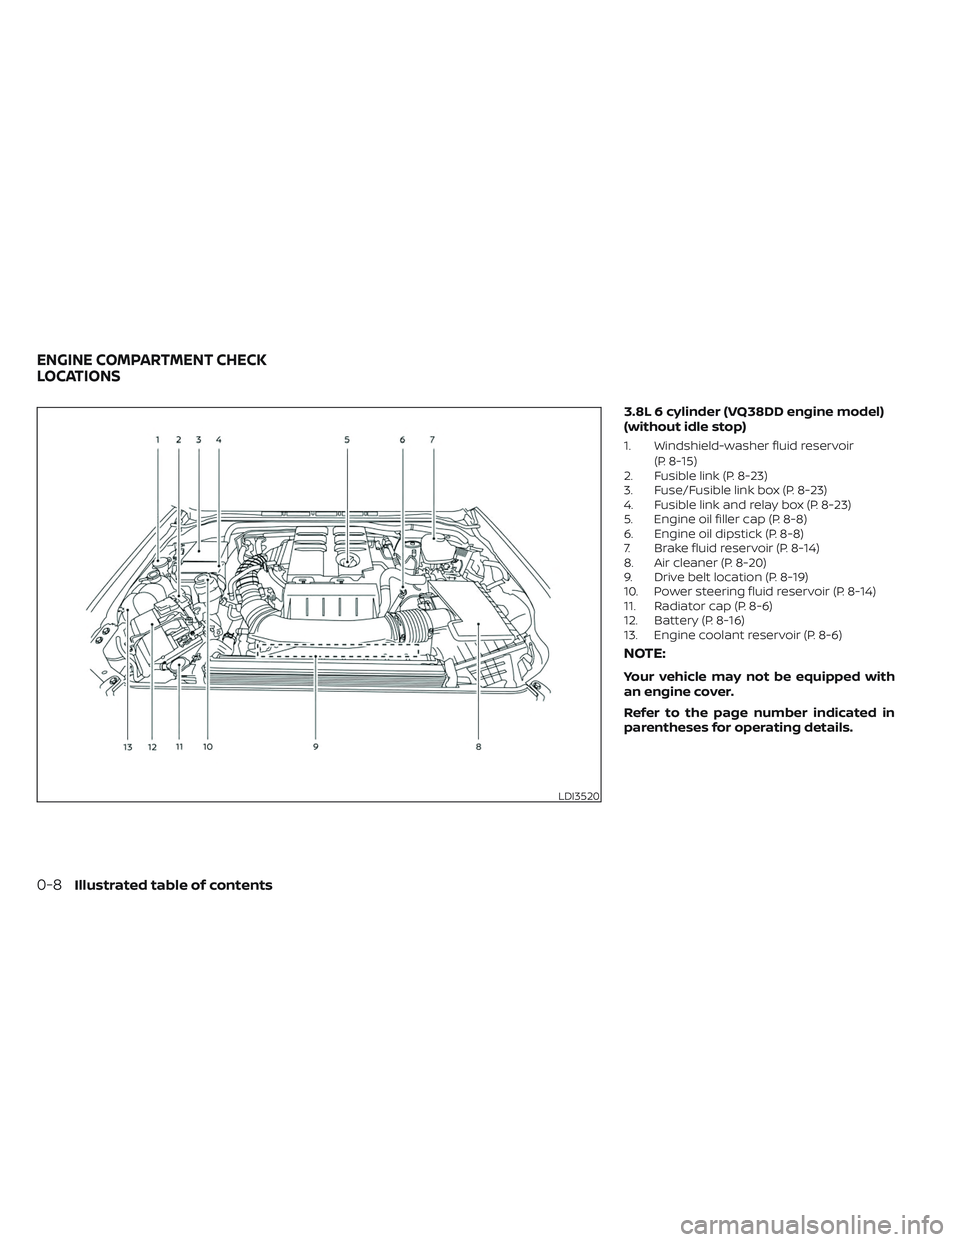 NISSAN FRONTIER 2023 User Guide 3.8L 6 cylinder (VQ38DD engine model)
(without idle stop)
1. Windshield-washer fluid reservoir(P. 8-15)
2. Fusible link (P. 8-23)
3. Fuse/Fusible link box (P. 8-23)
4. Fusible link and relay box (P. 8